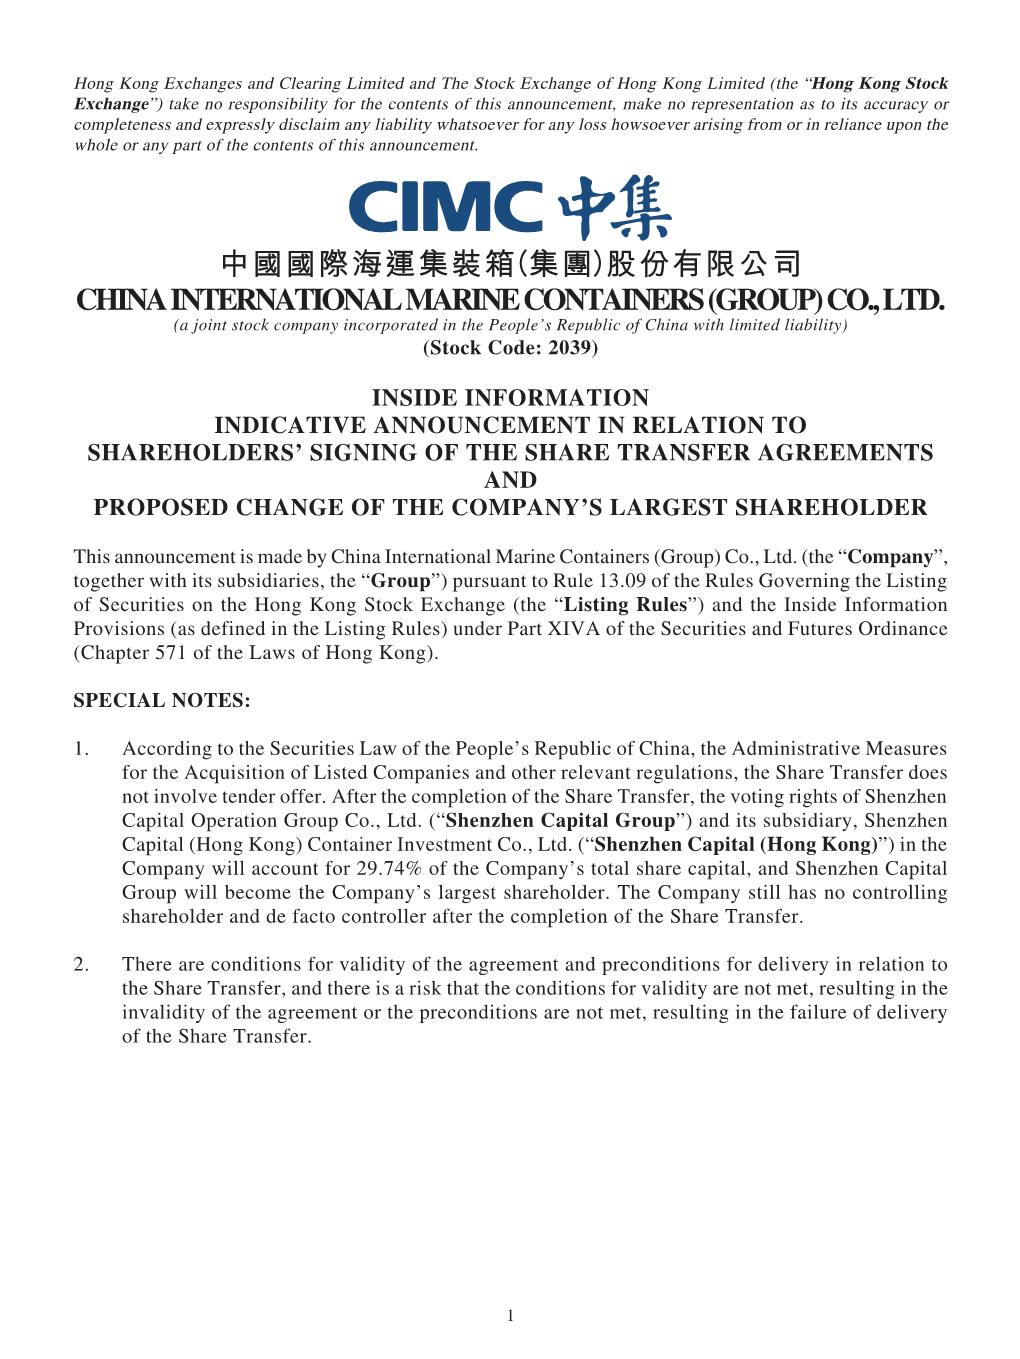 CO., LTD. (A Joint Stock Company Incorporated in the People’S Republic of China with Limited Liability) (Stock Code: 2039)